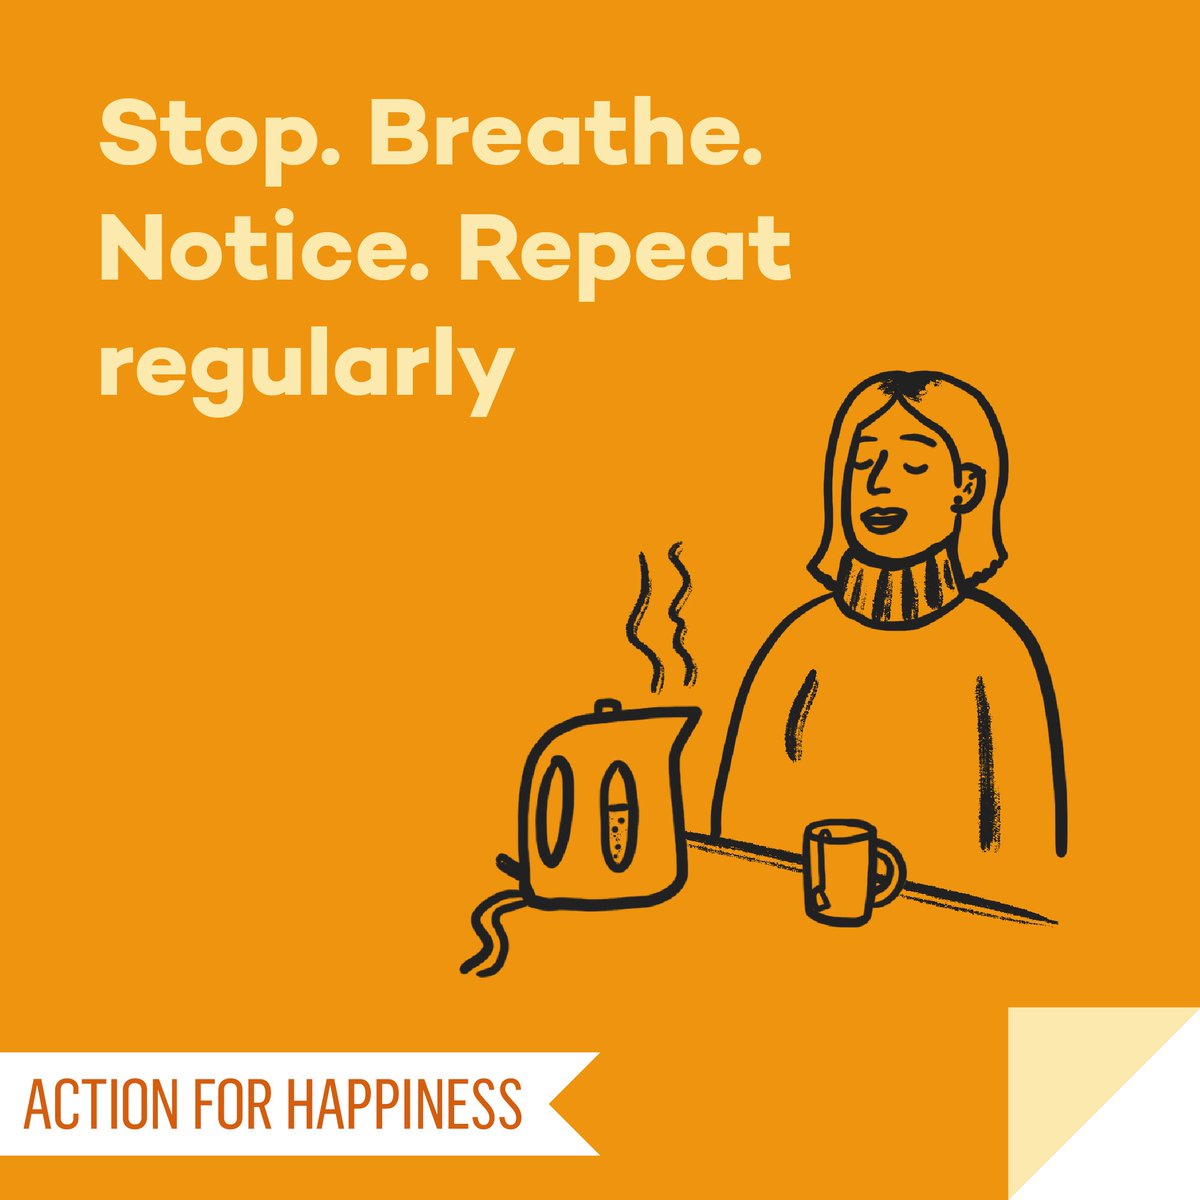 Mindful March - Day 15: Stop. Breathe. Notice. Repeat regularly actionforhappiness.org/mindful-march #MindfulMarch